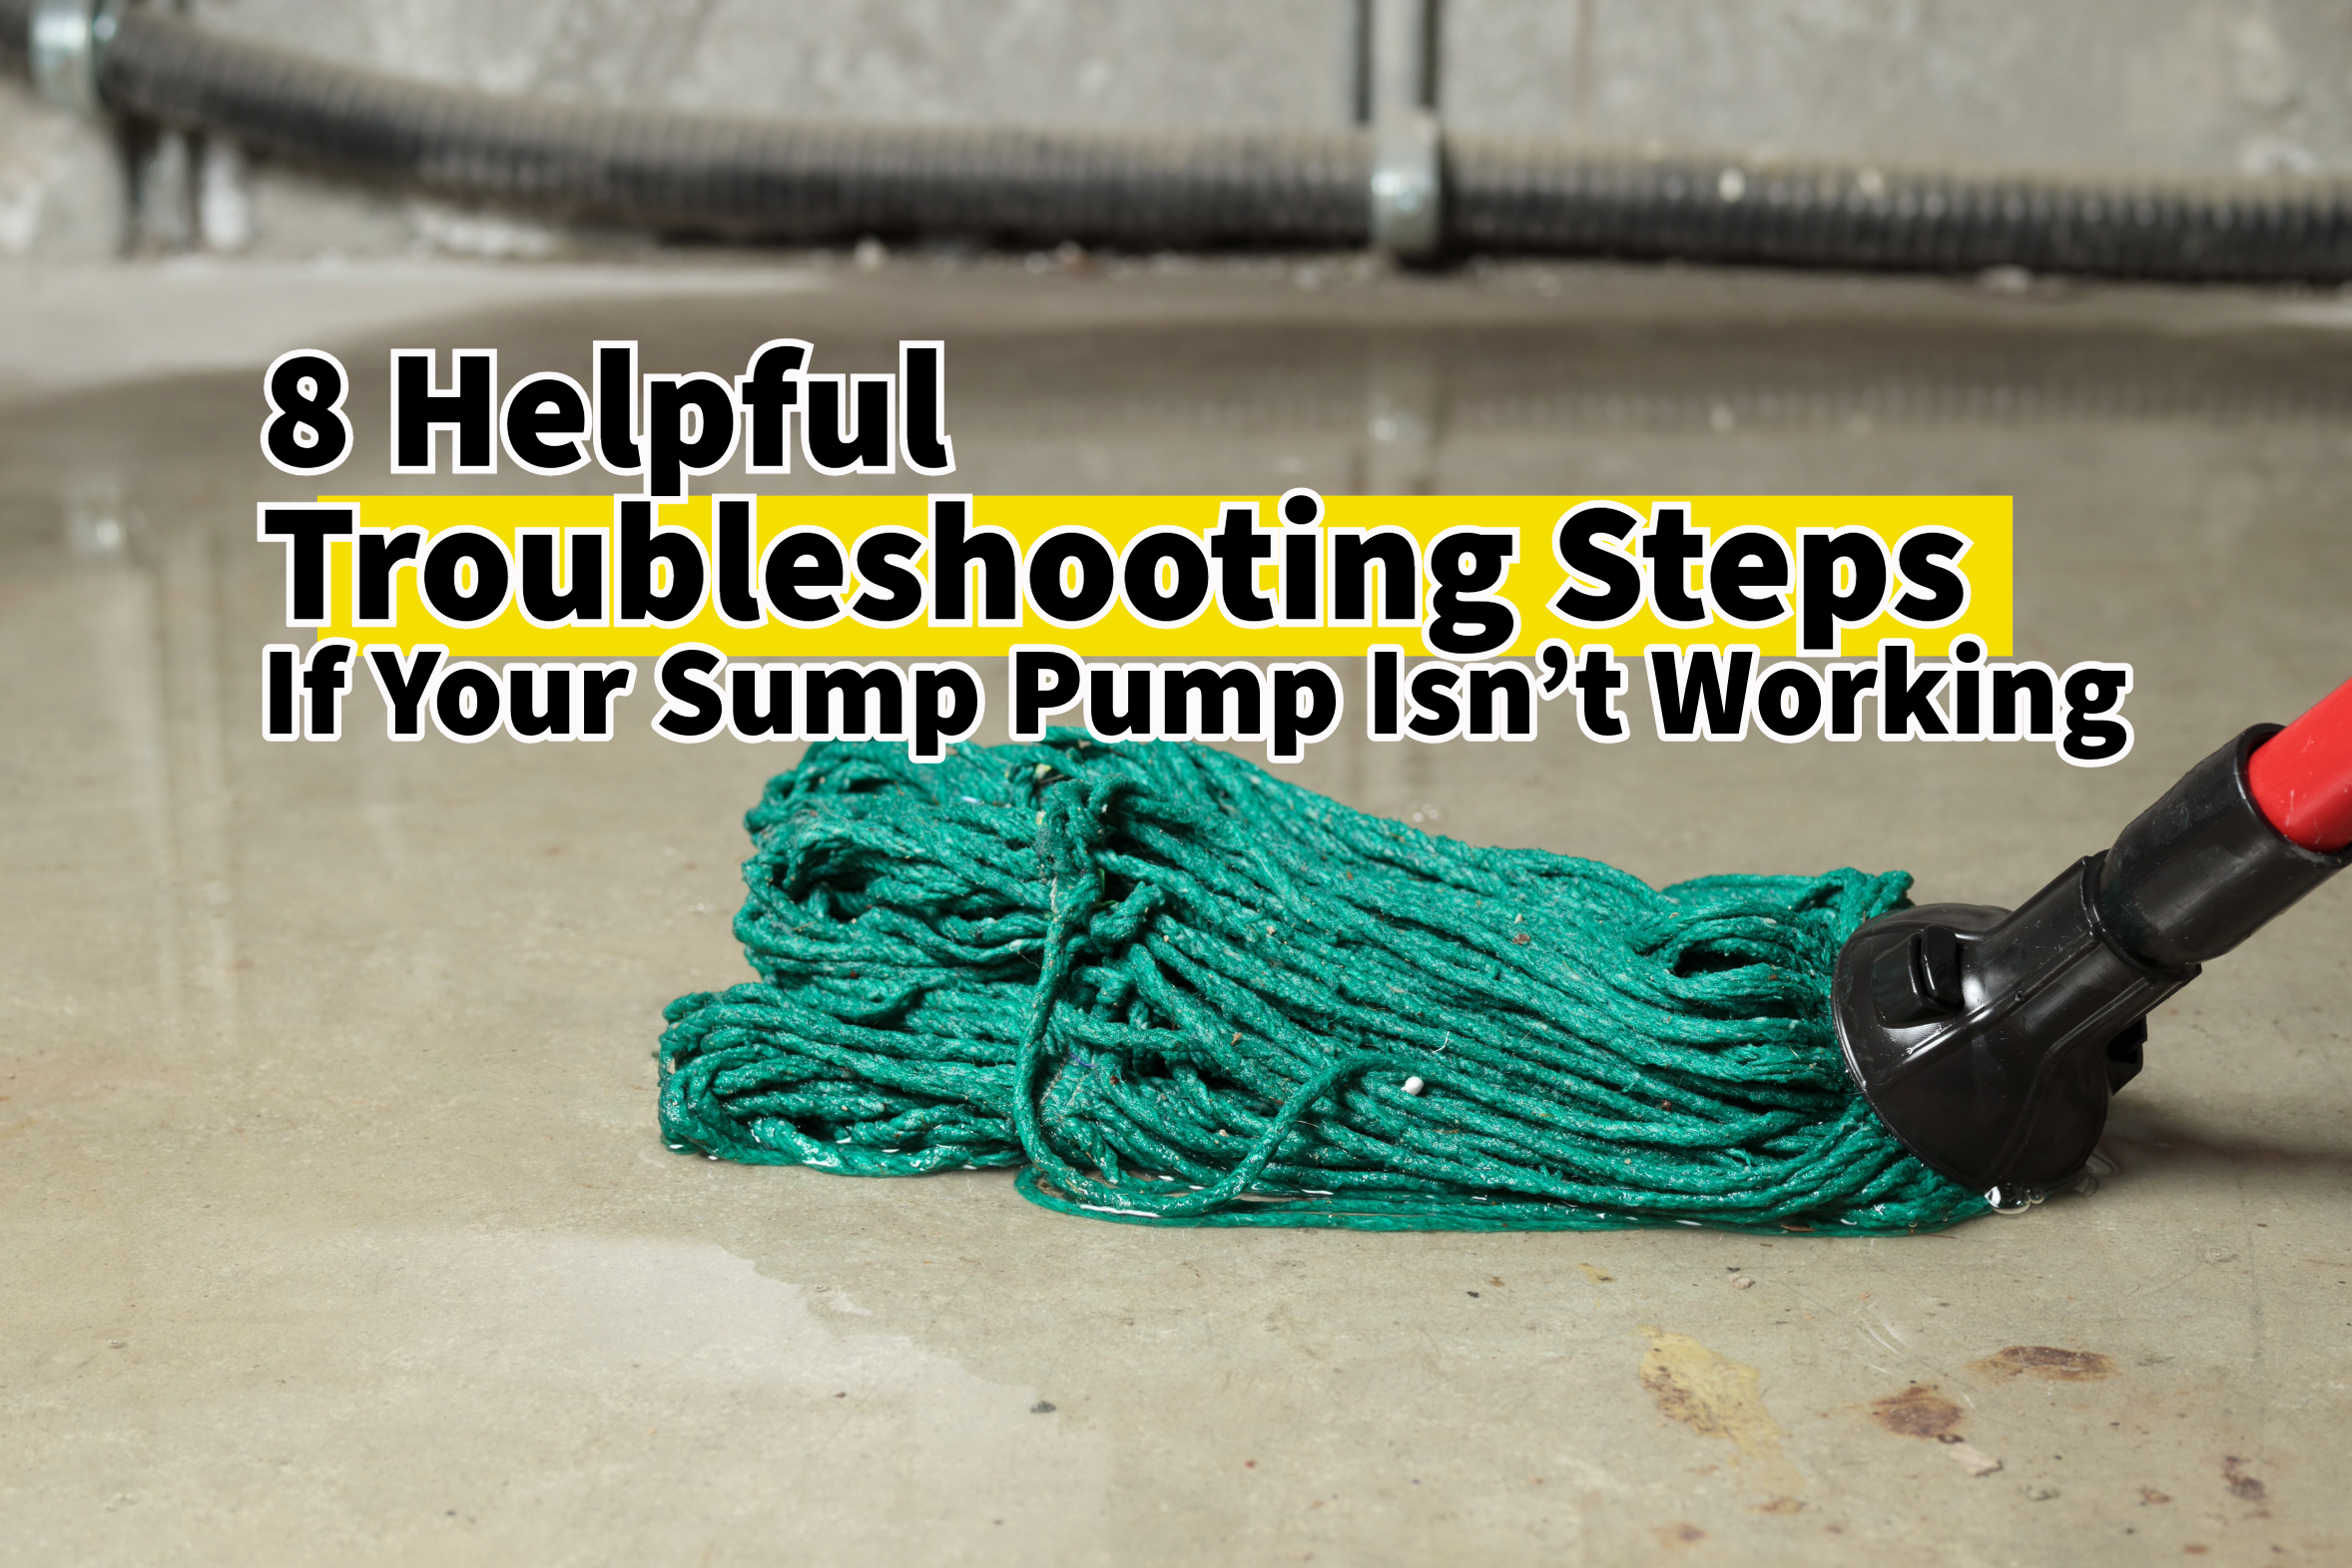 A homeowner’s guide to troubleshooting a malfunctioning sump pump. Plumbing and drain services in Cincinnati, Ohio.